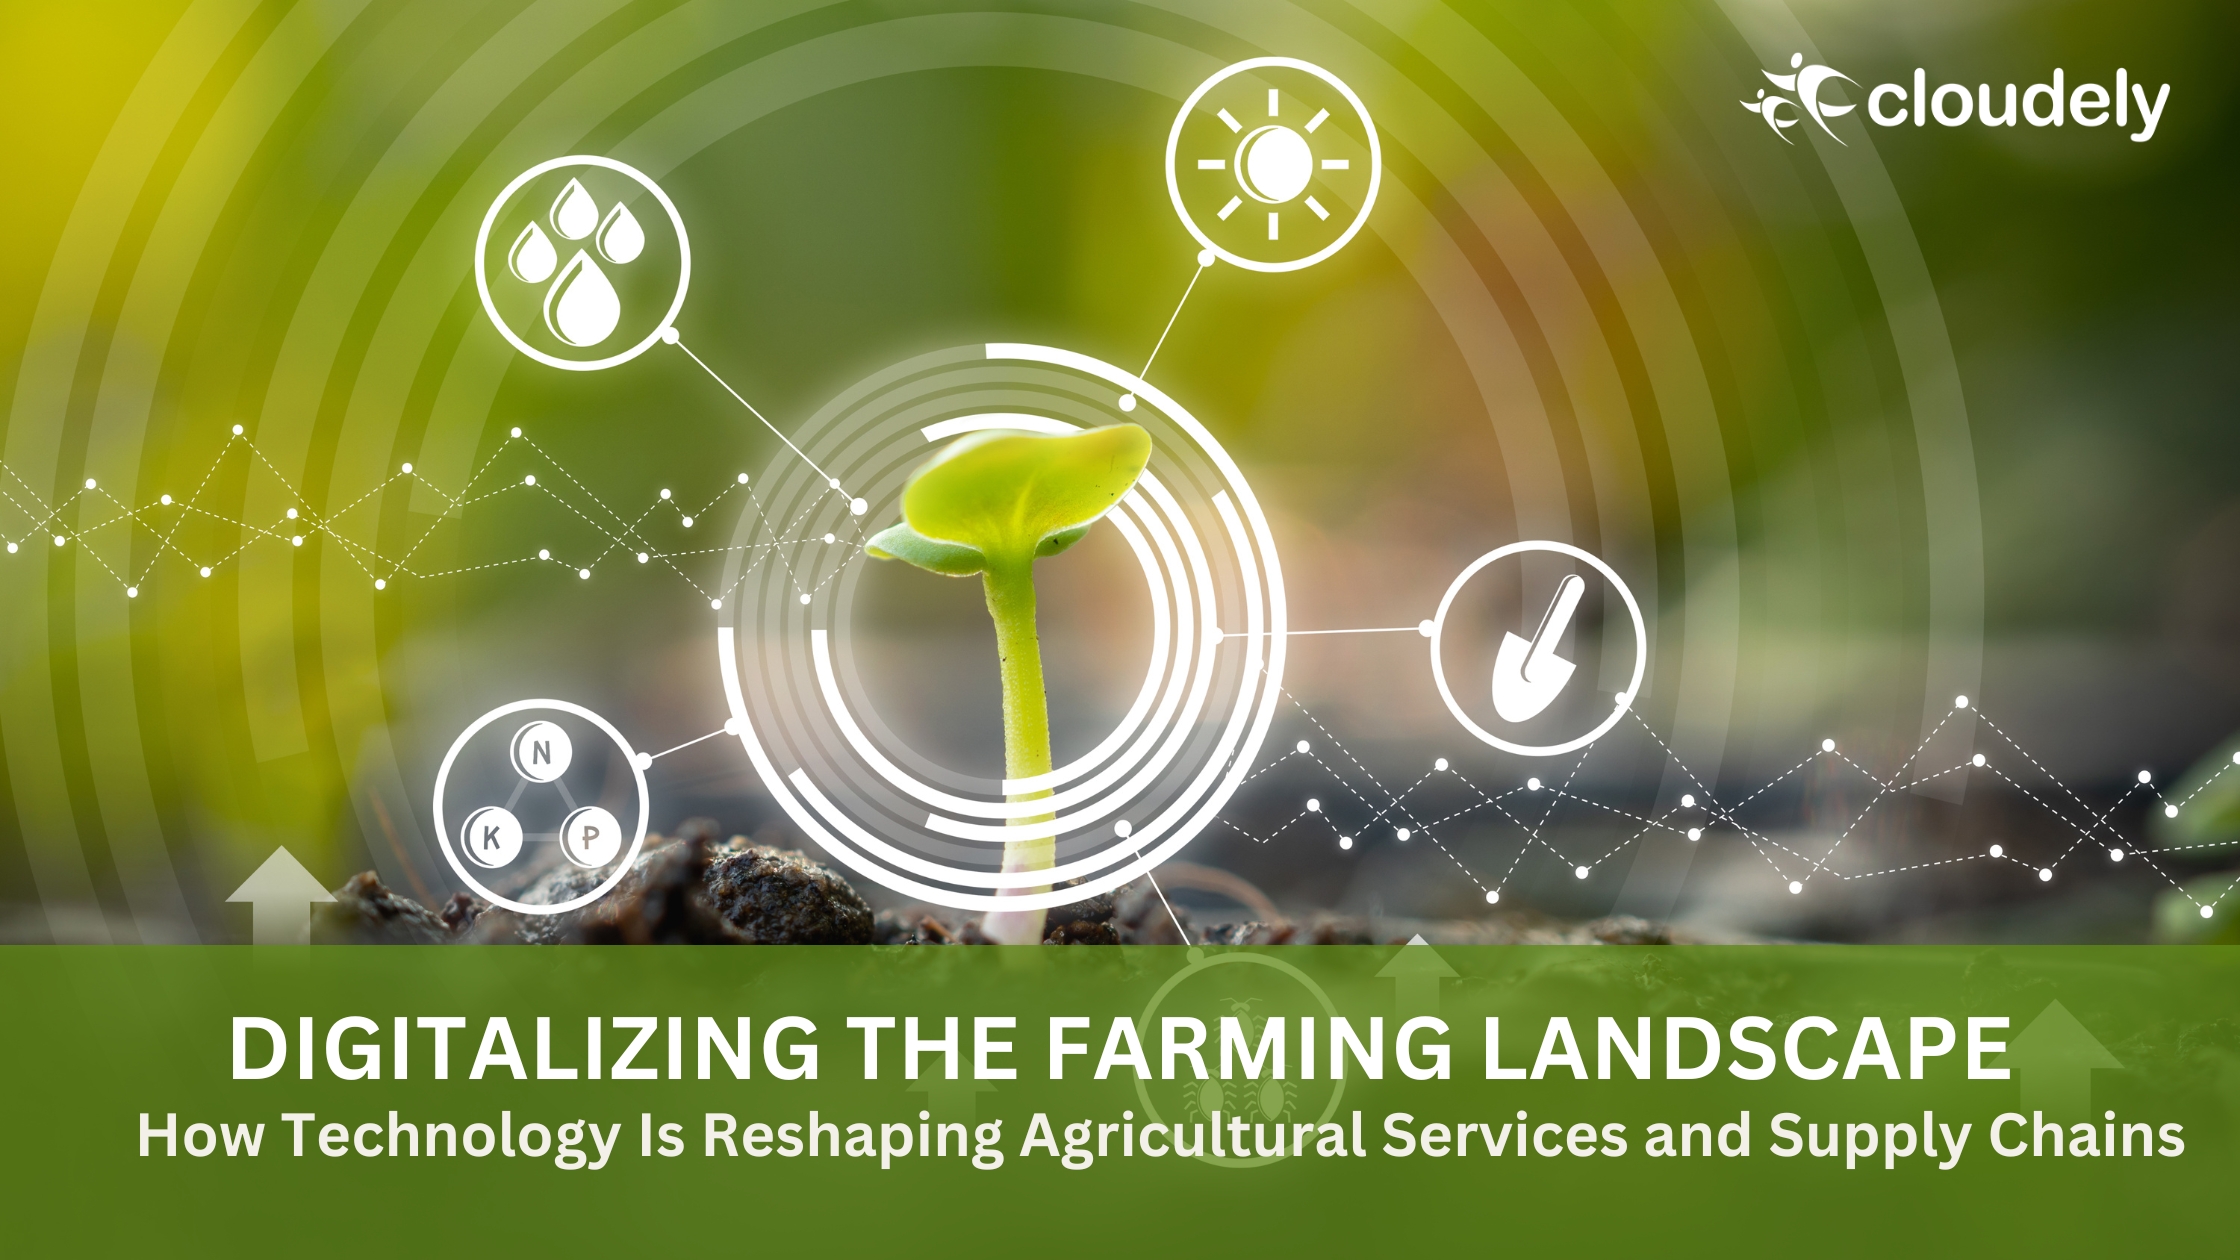 How Technology Is Reshaping Agricultural Services and Supply Chains